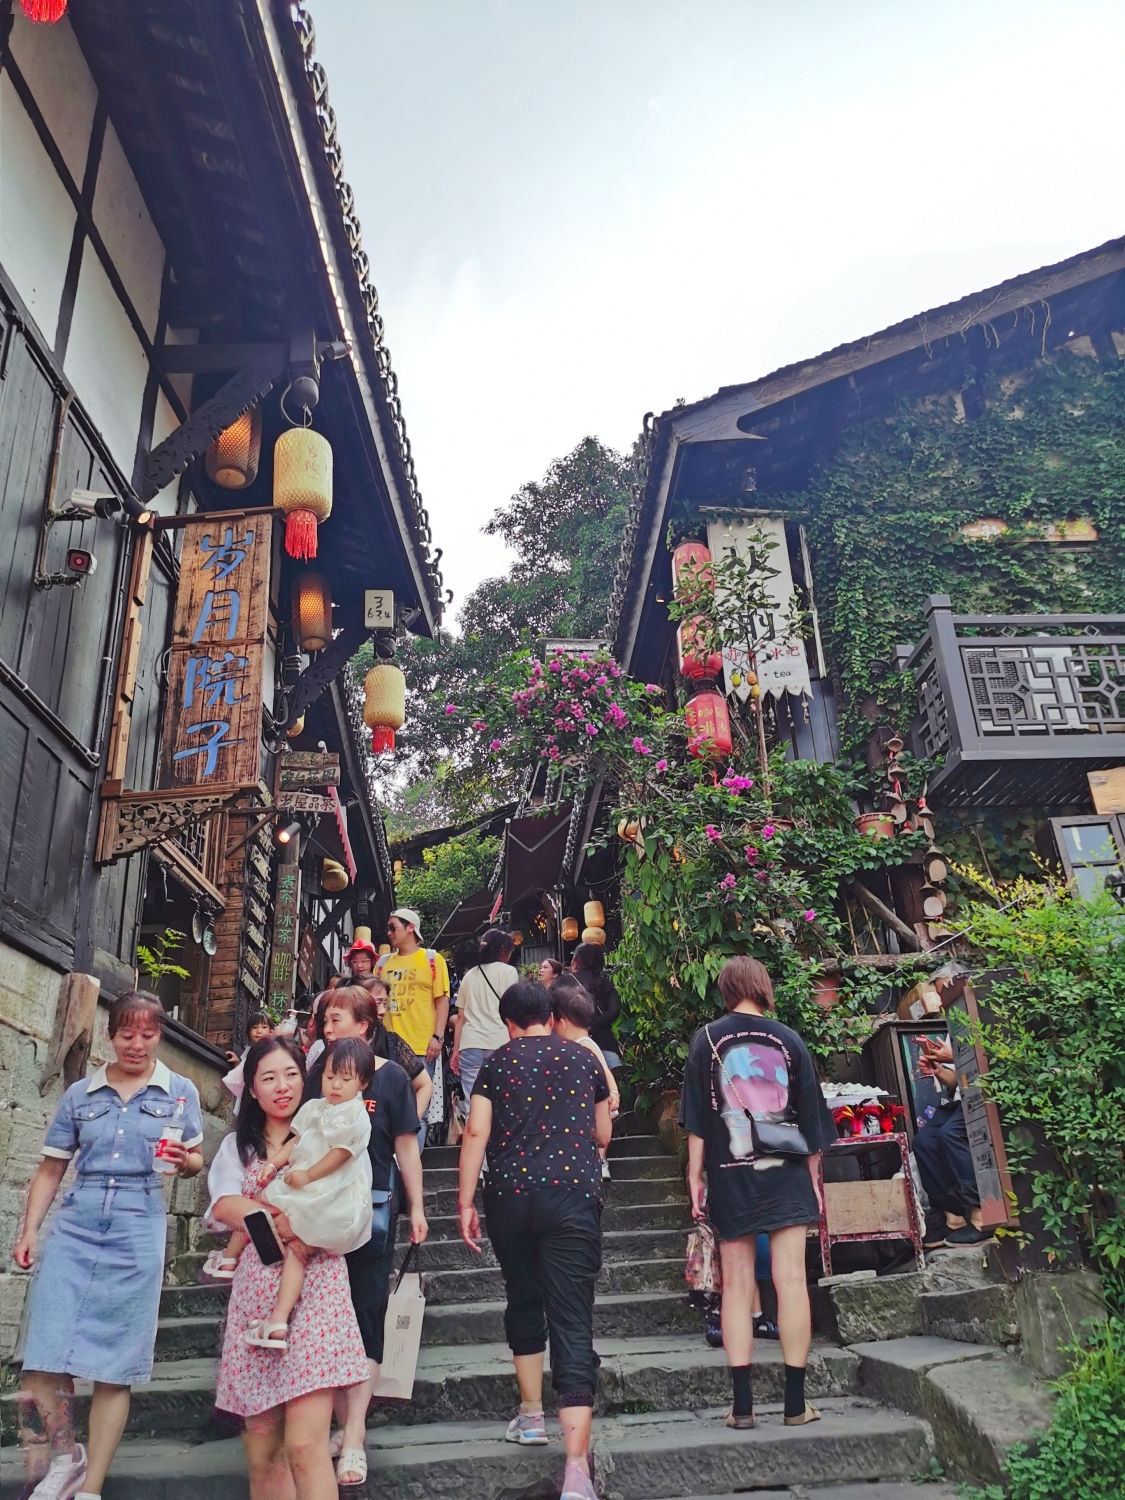 Tourists visit Ciqikou ancient town in southwest China's Chongqing on August 21, 2023. /CGTN